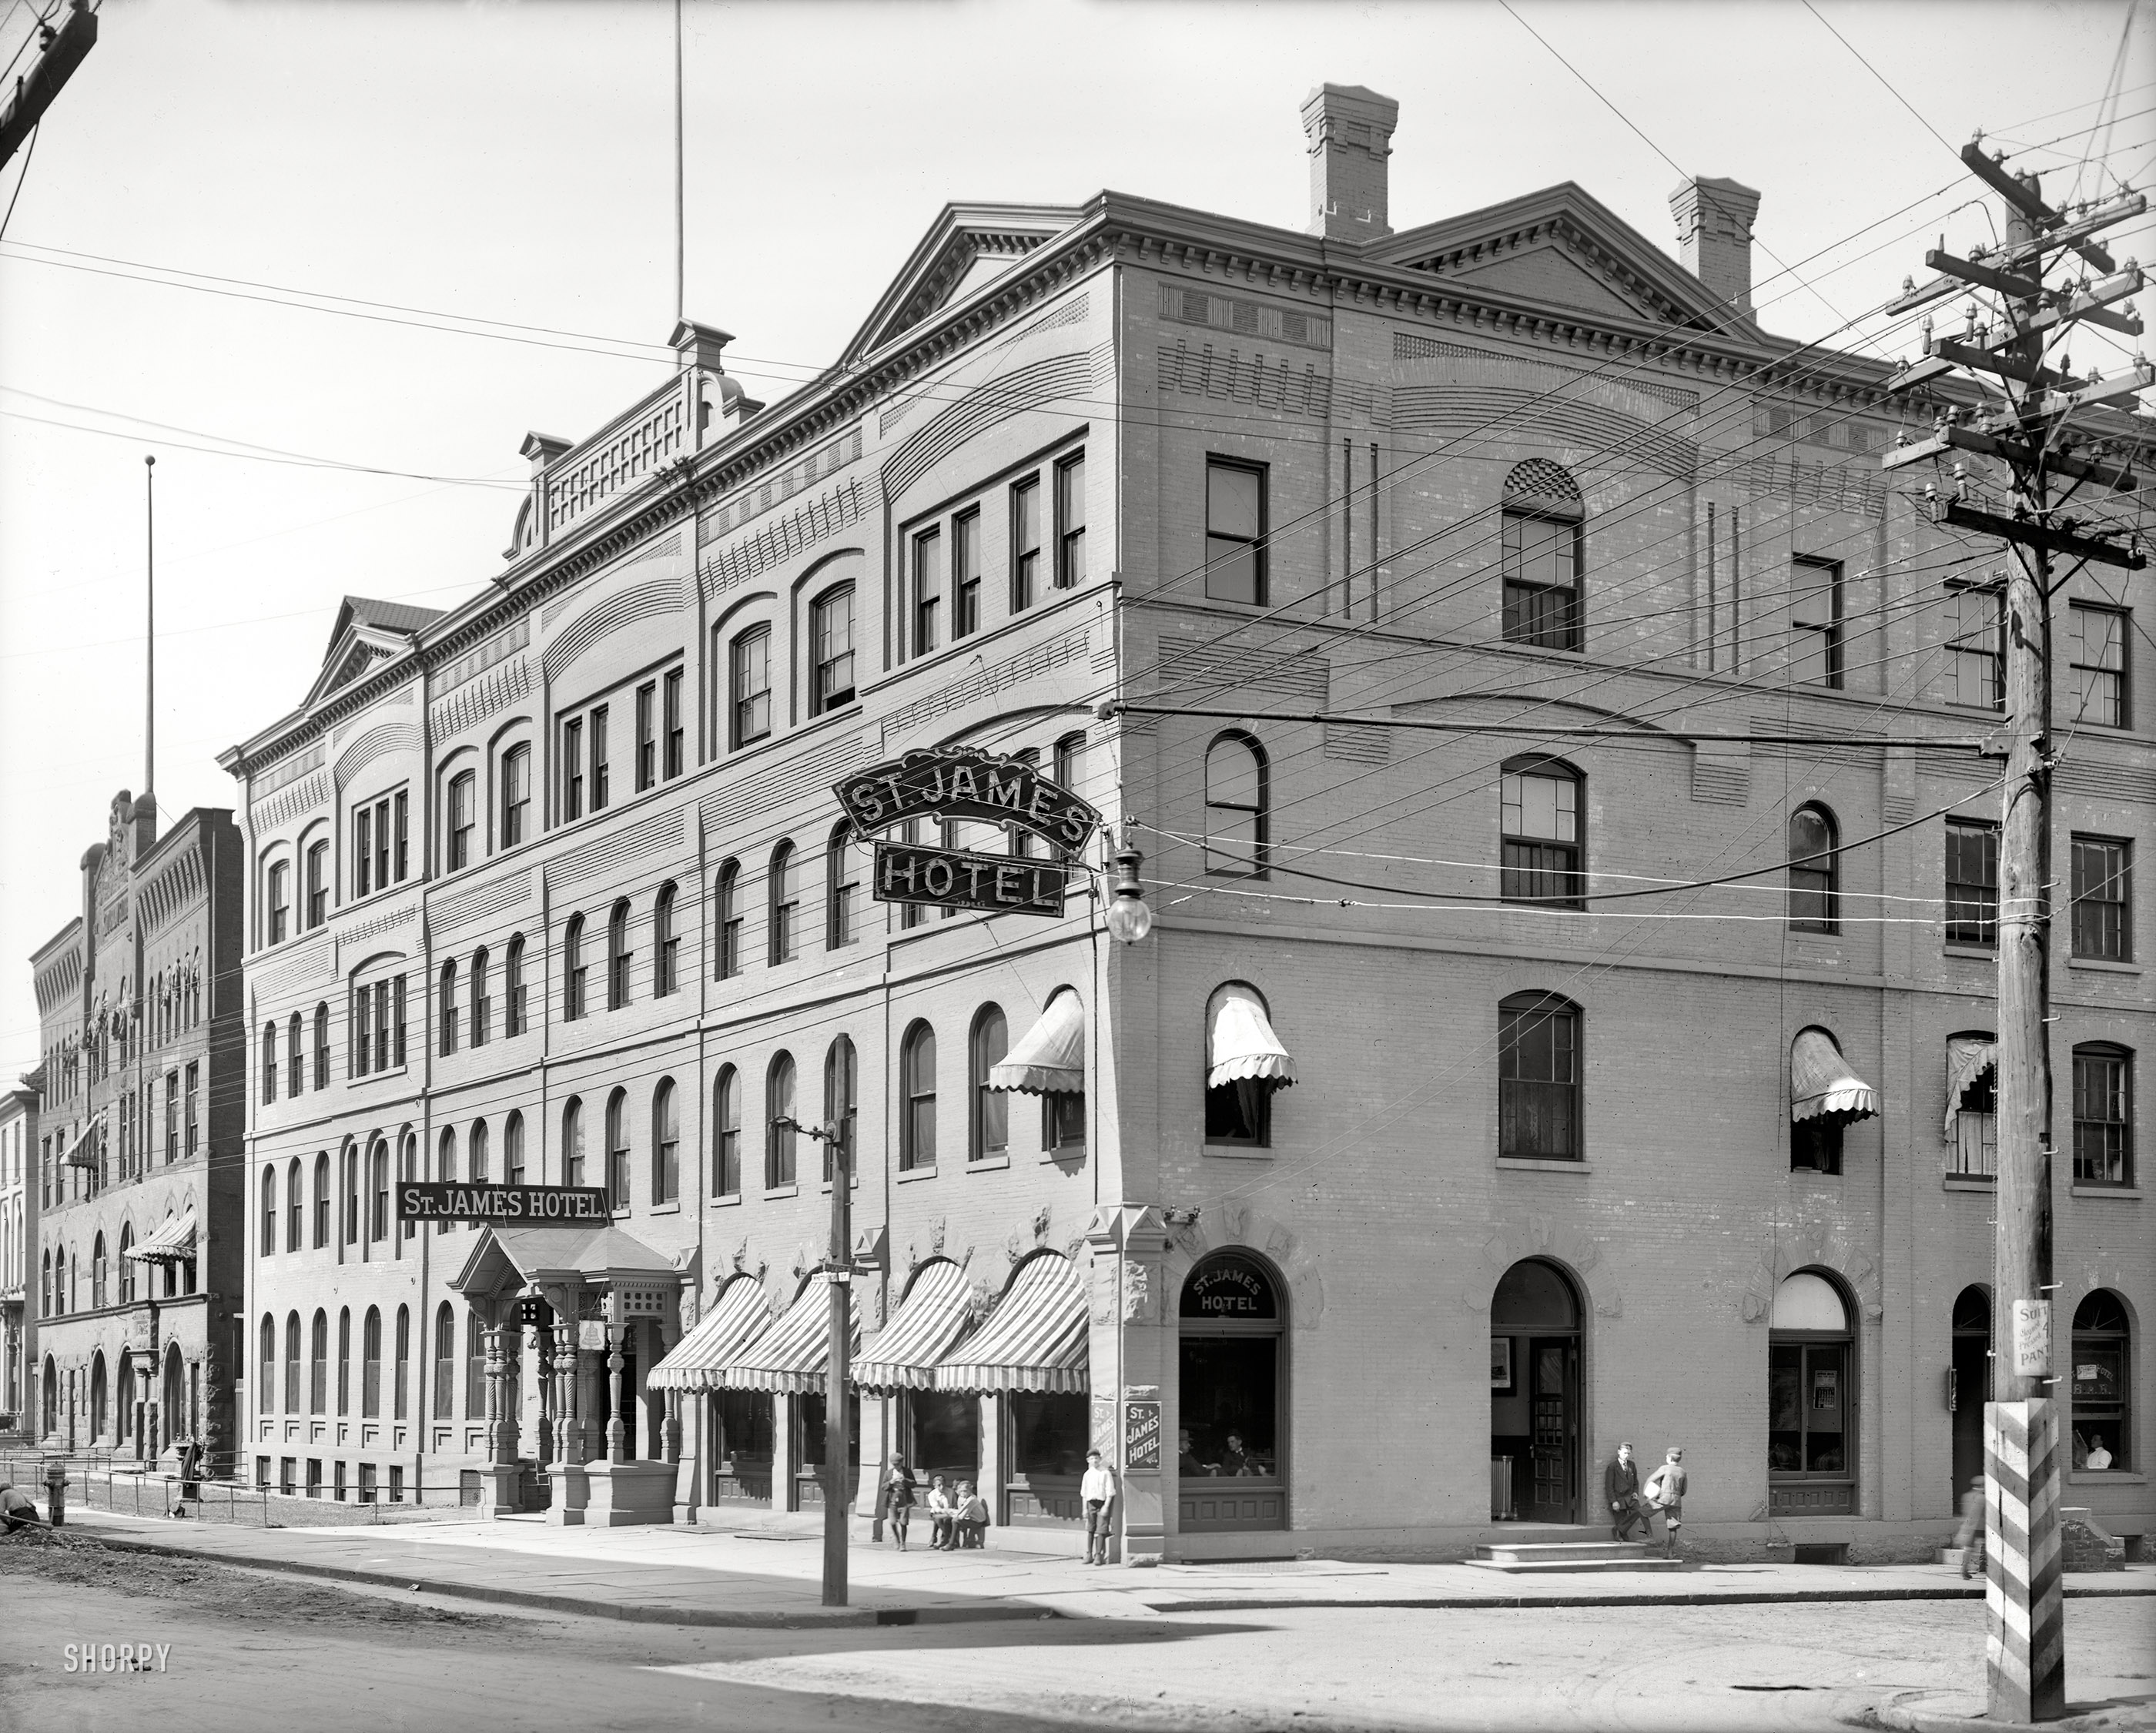 Circa 1910. "St. James Hotel -- Utica, New York." Continuing our tour of the Handshake City. 8x10 glass negative, Detroit Publishing Co. View full size.